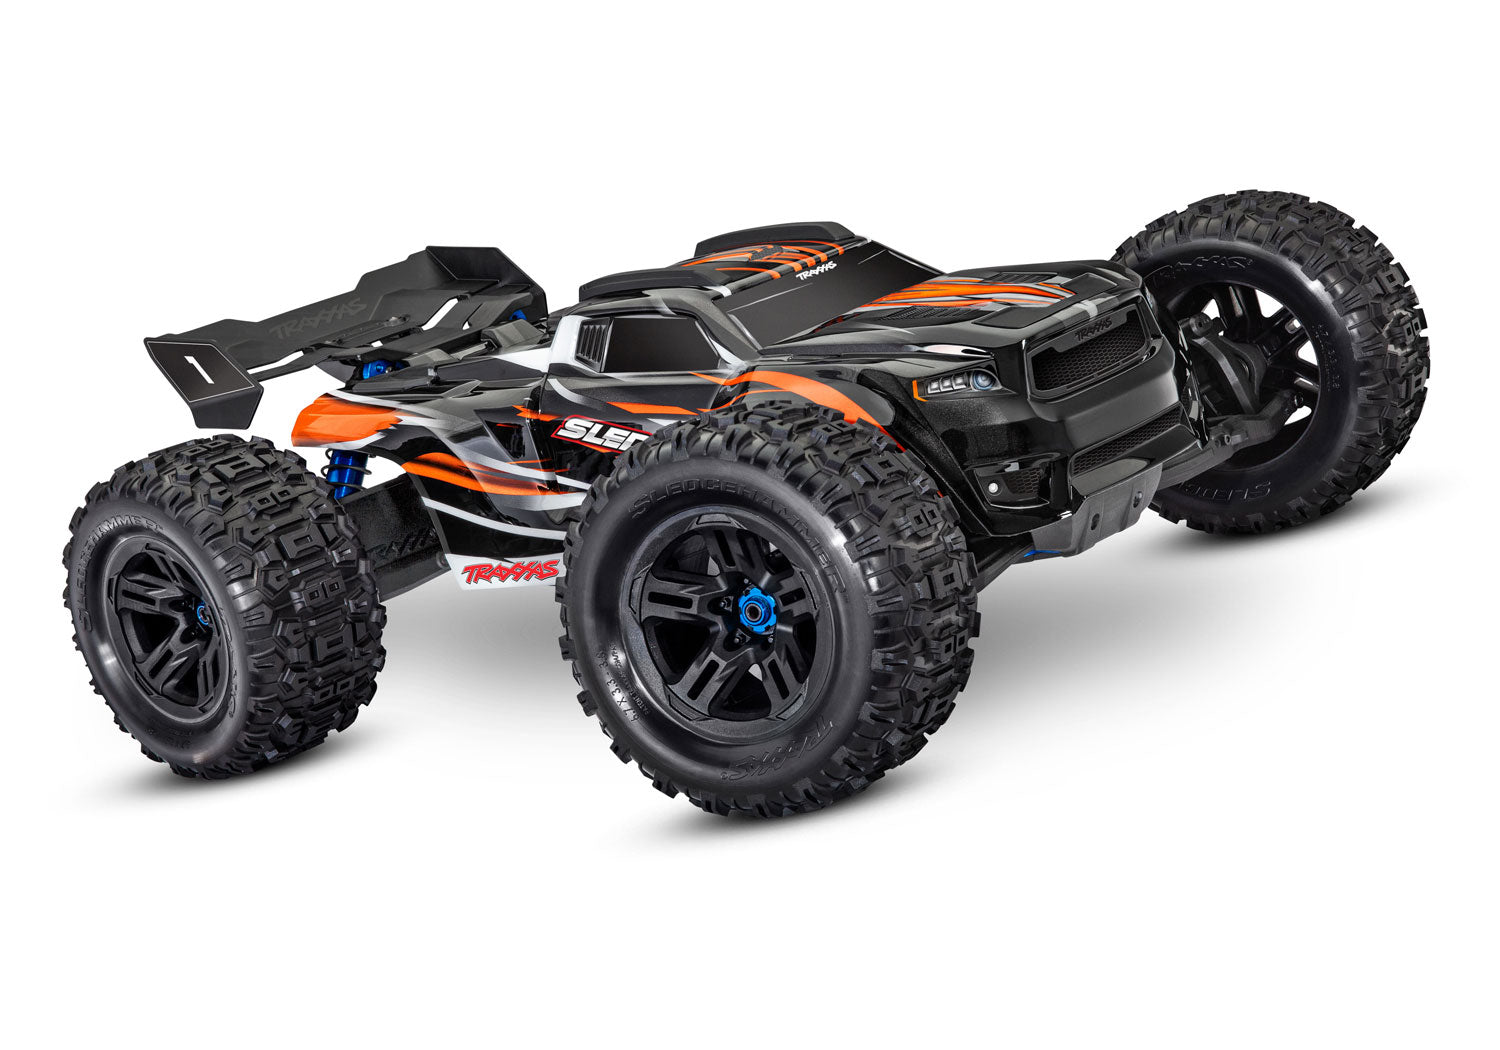 TRAXXAS 95076-4 Sledge 1/8 scale 4WD brushless monster truck. Fully assembled, RTR with TQi™ 2.4GHz radio system, VXL-6s™ power system, and ProGraphix® clipless body.